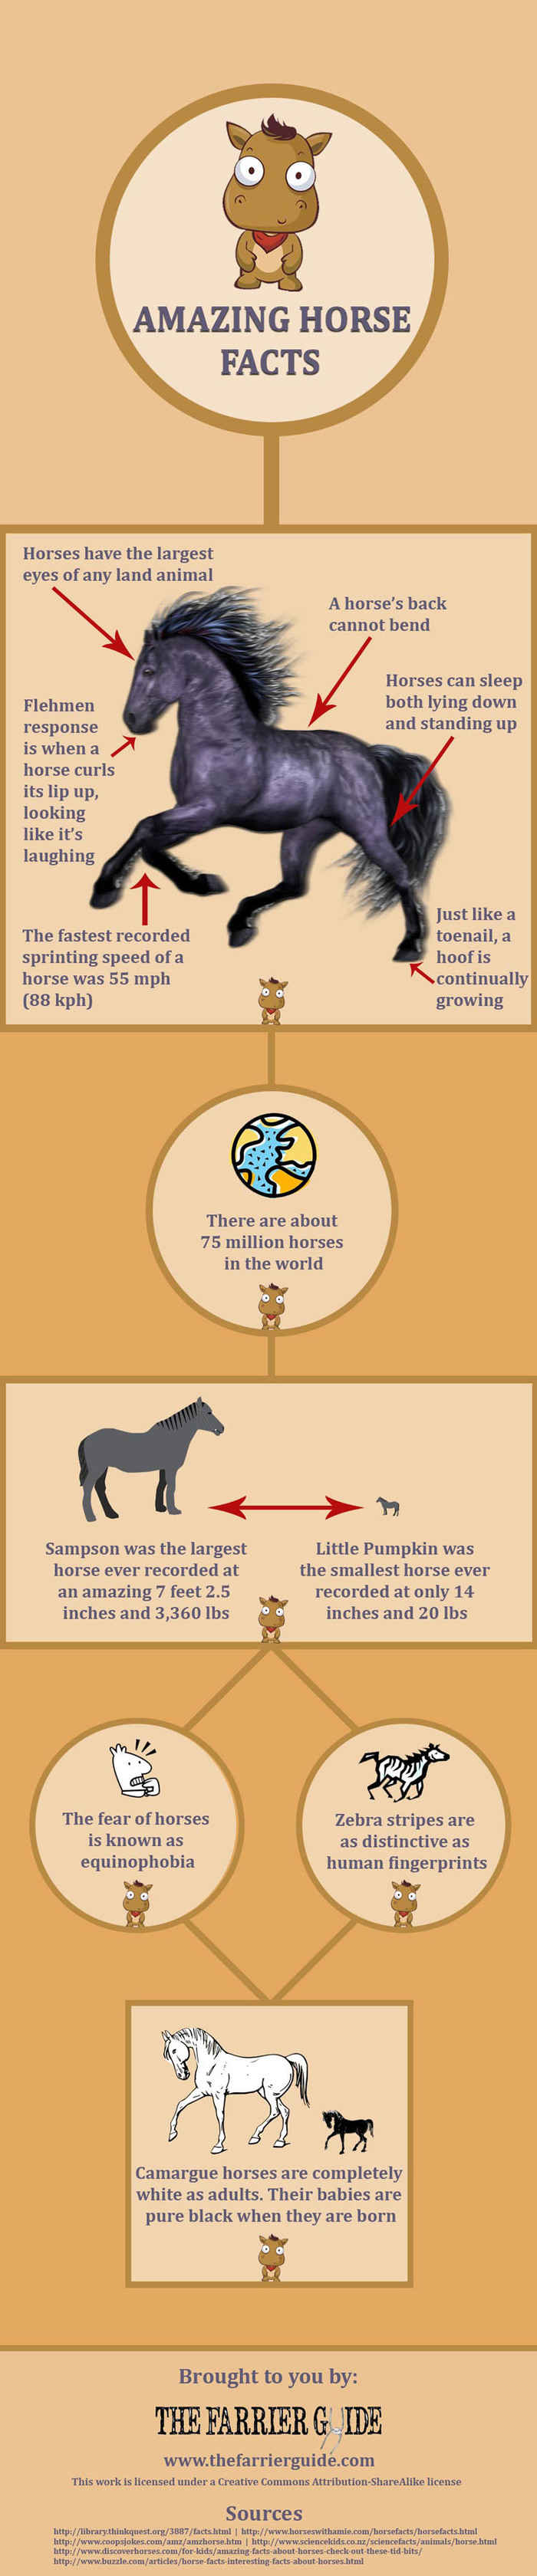 Amazing facts about horses